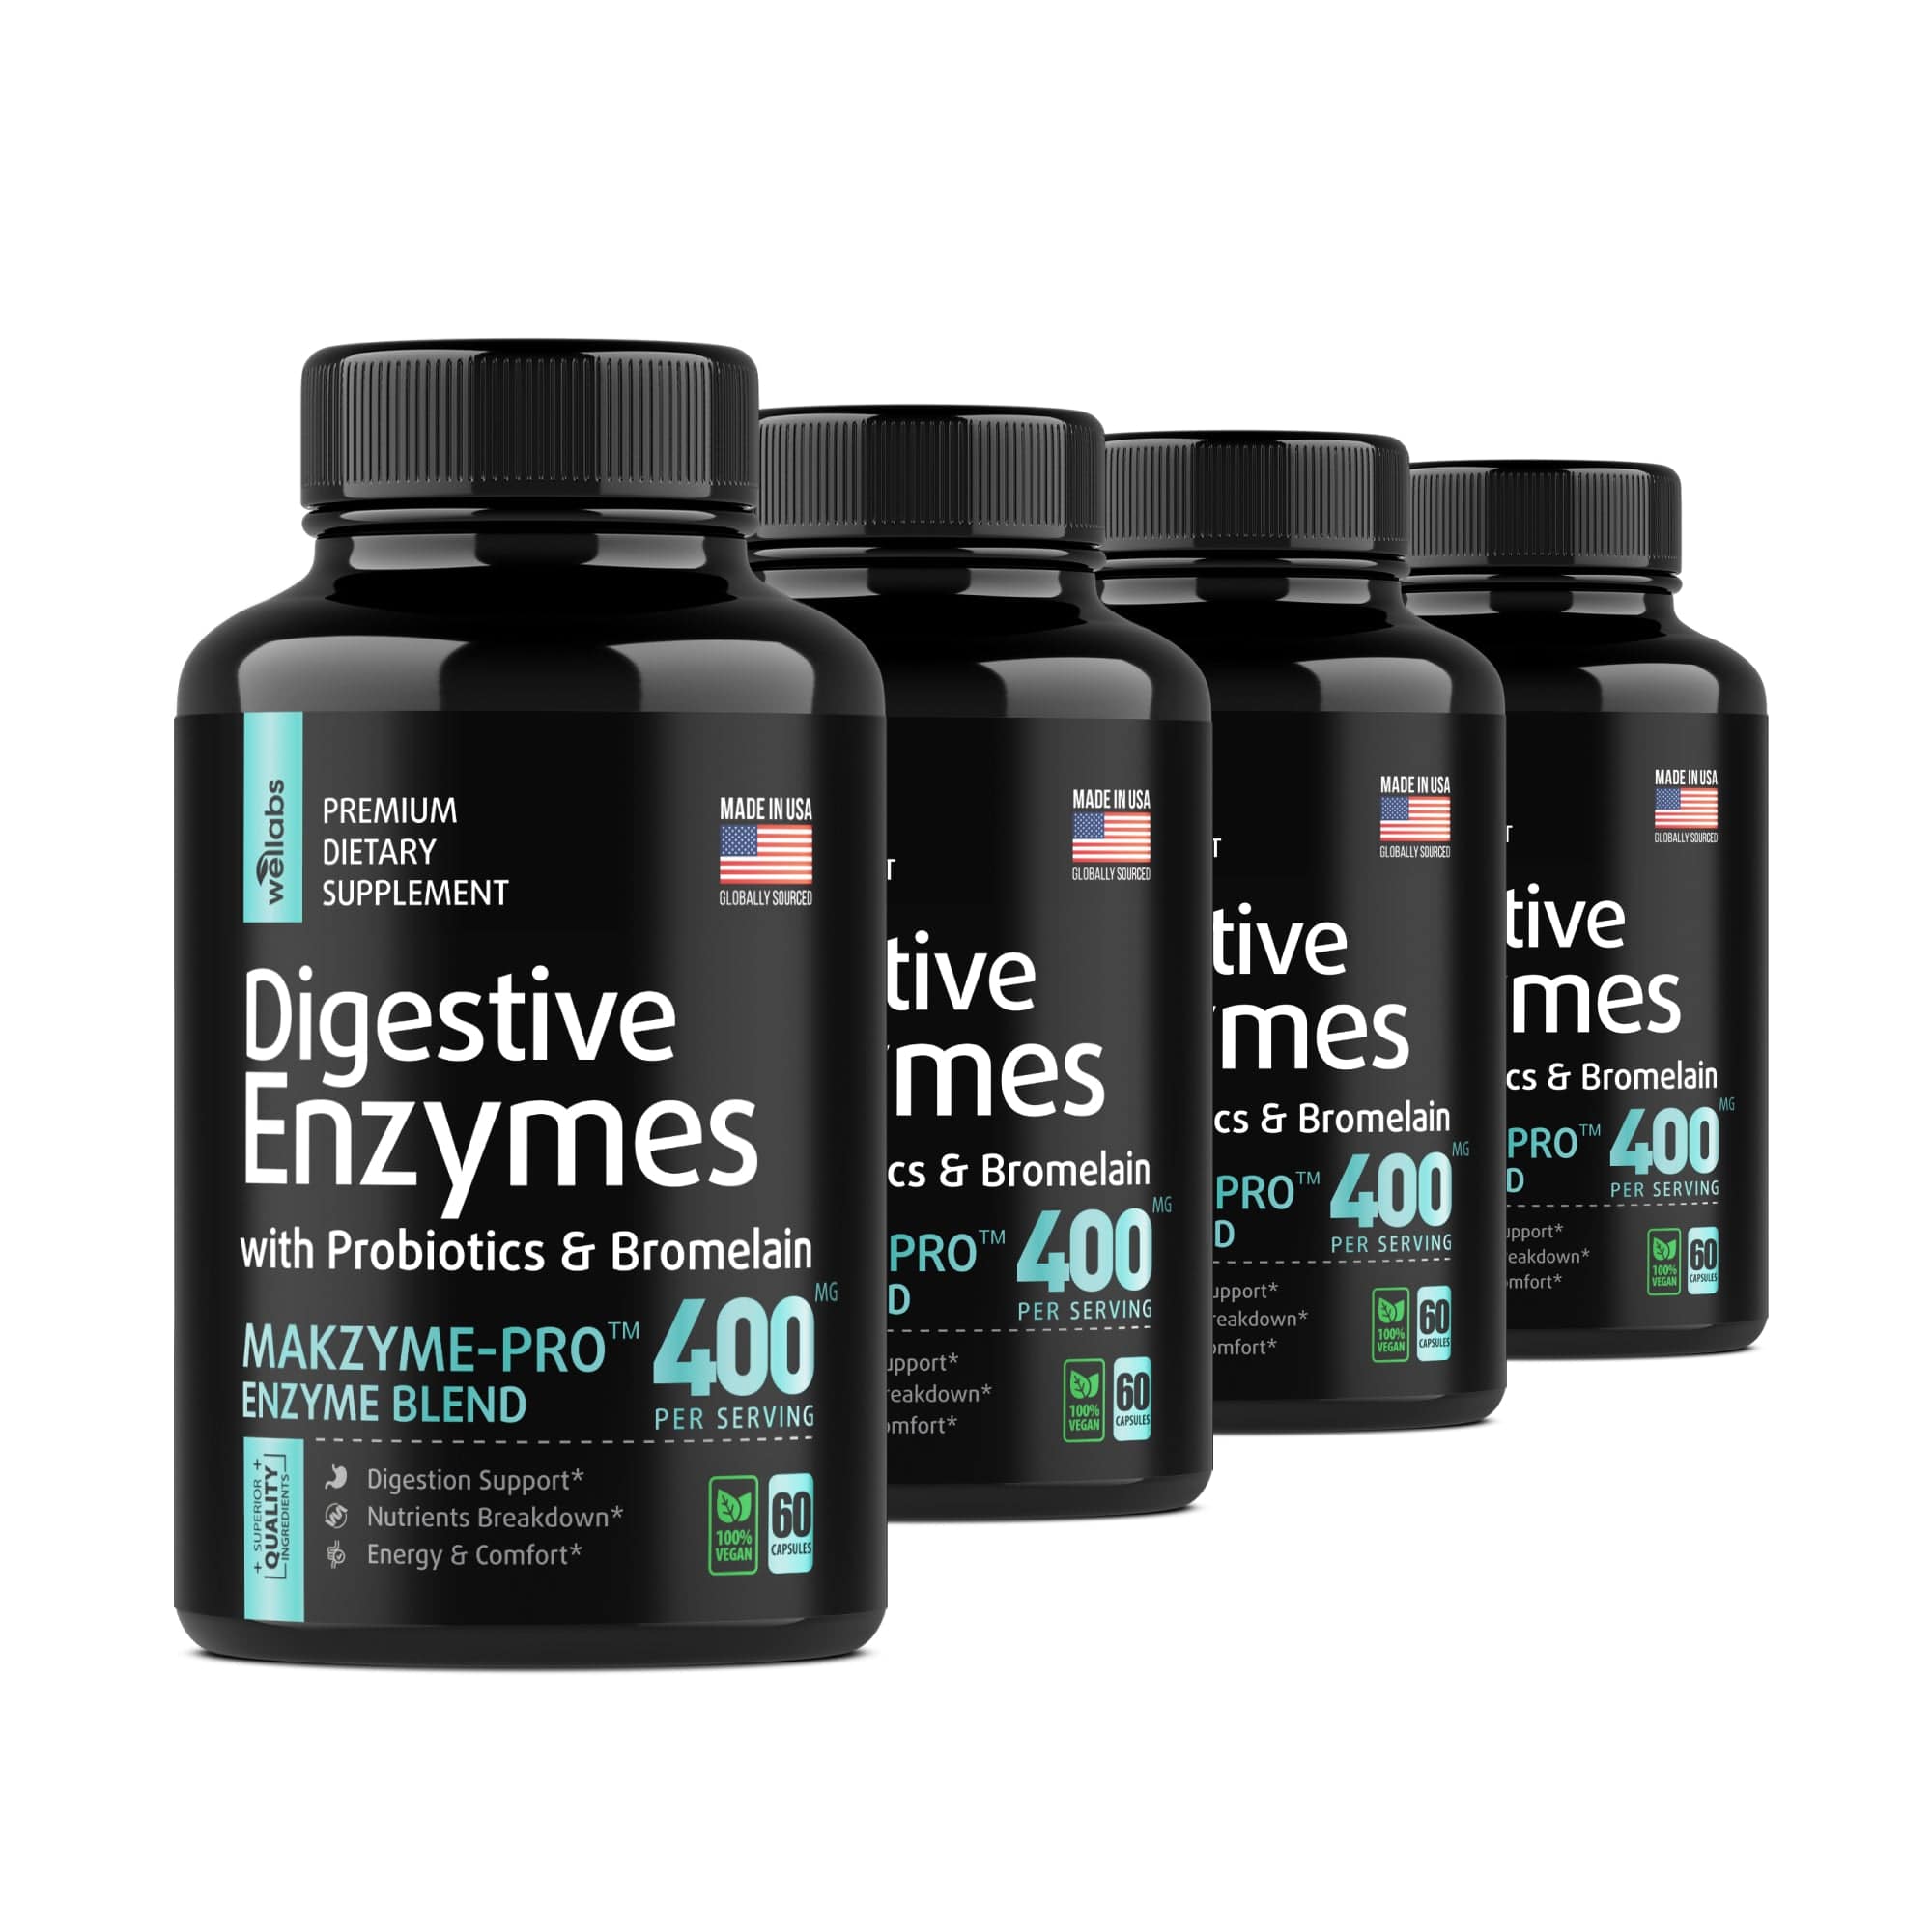 Digestive Enzyme Supplements With Probiotics Buy 3 Get 1 Free